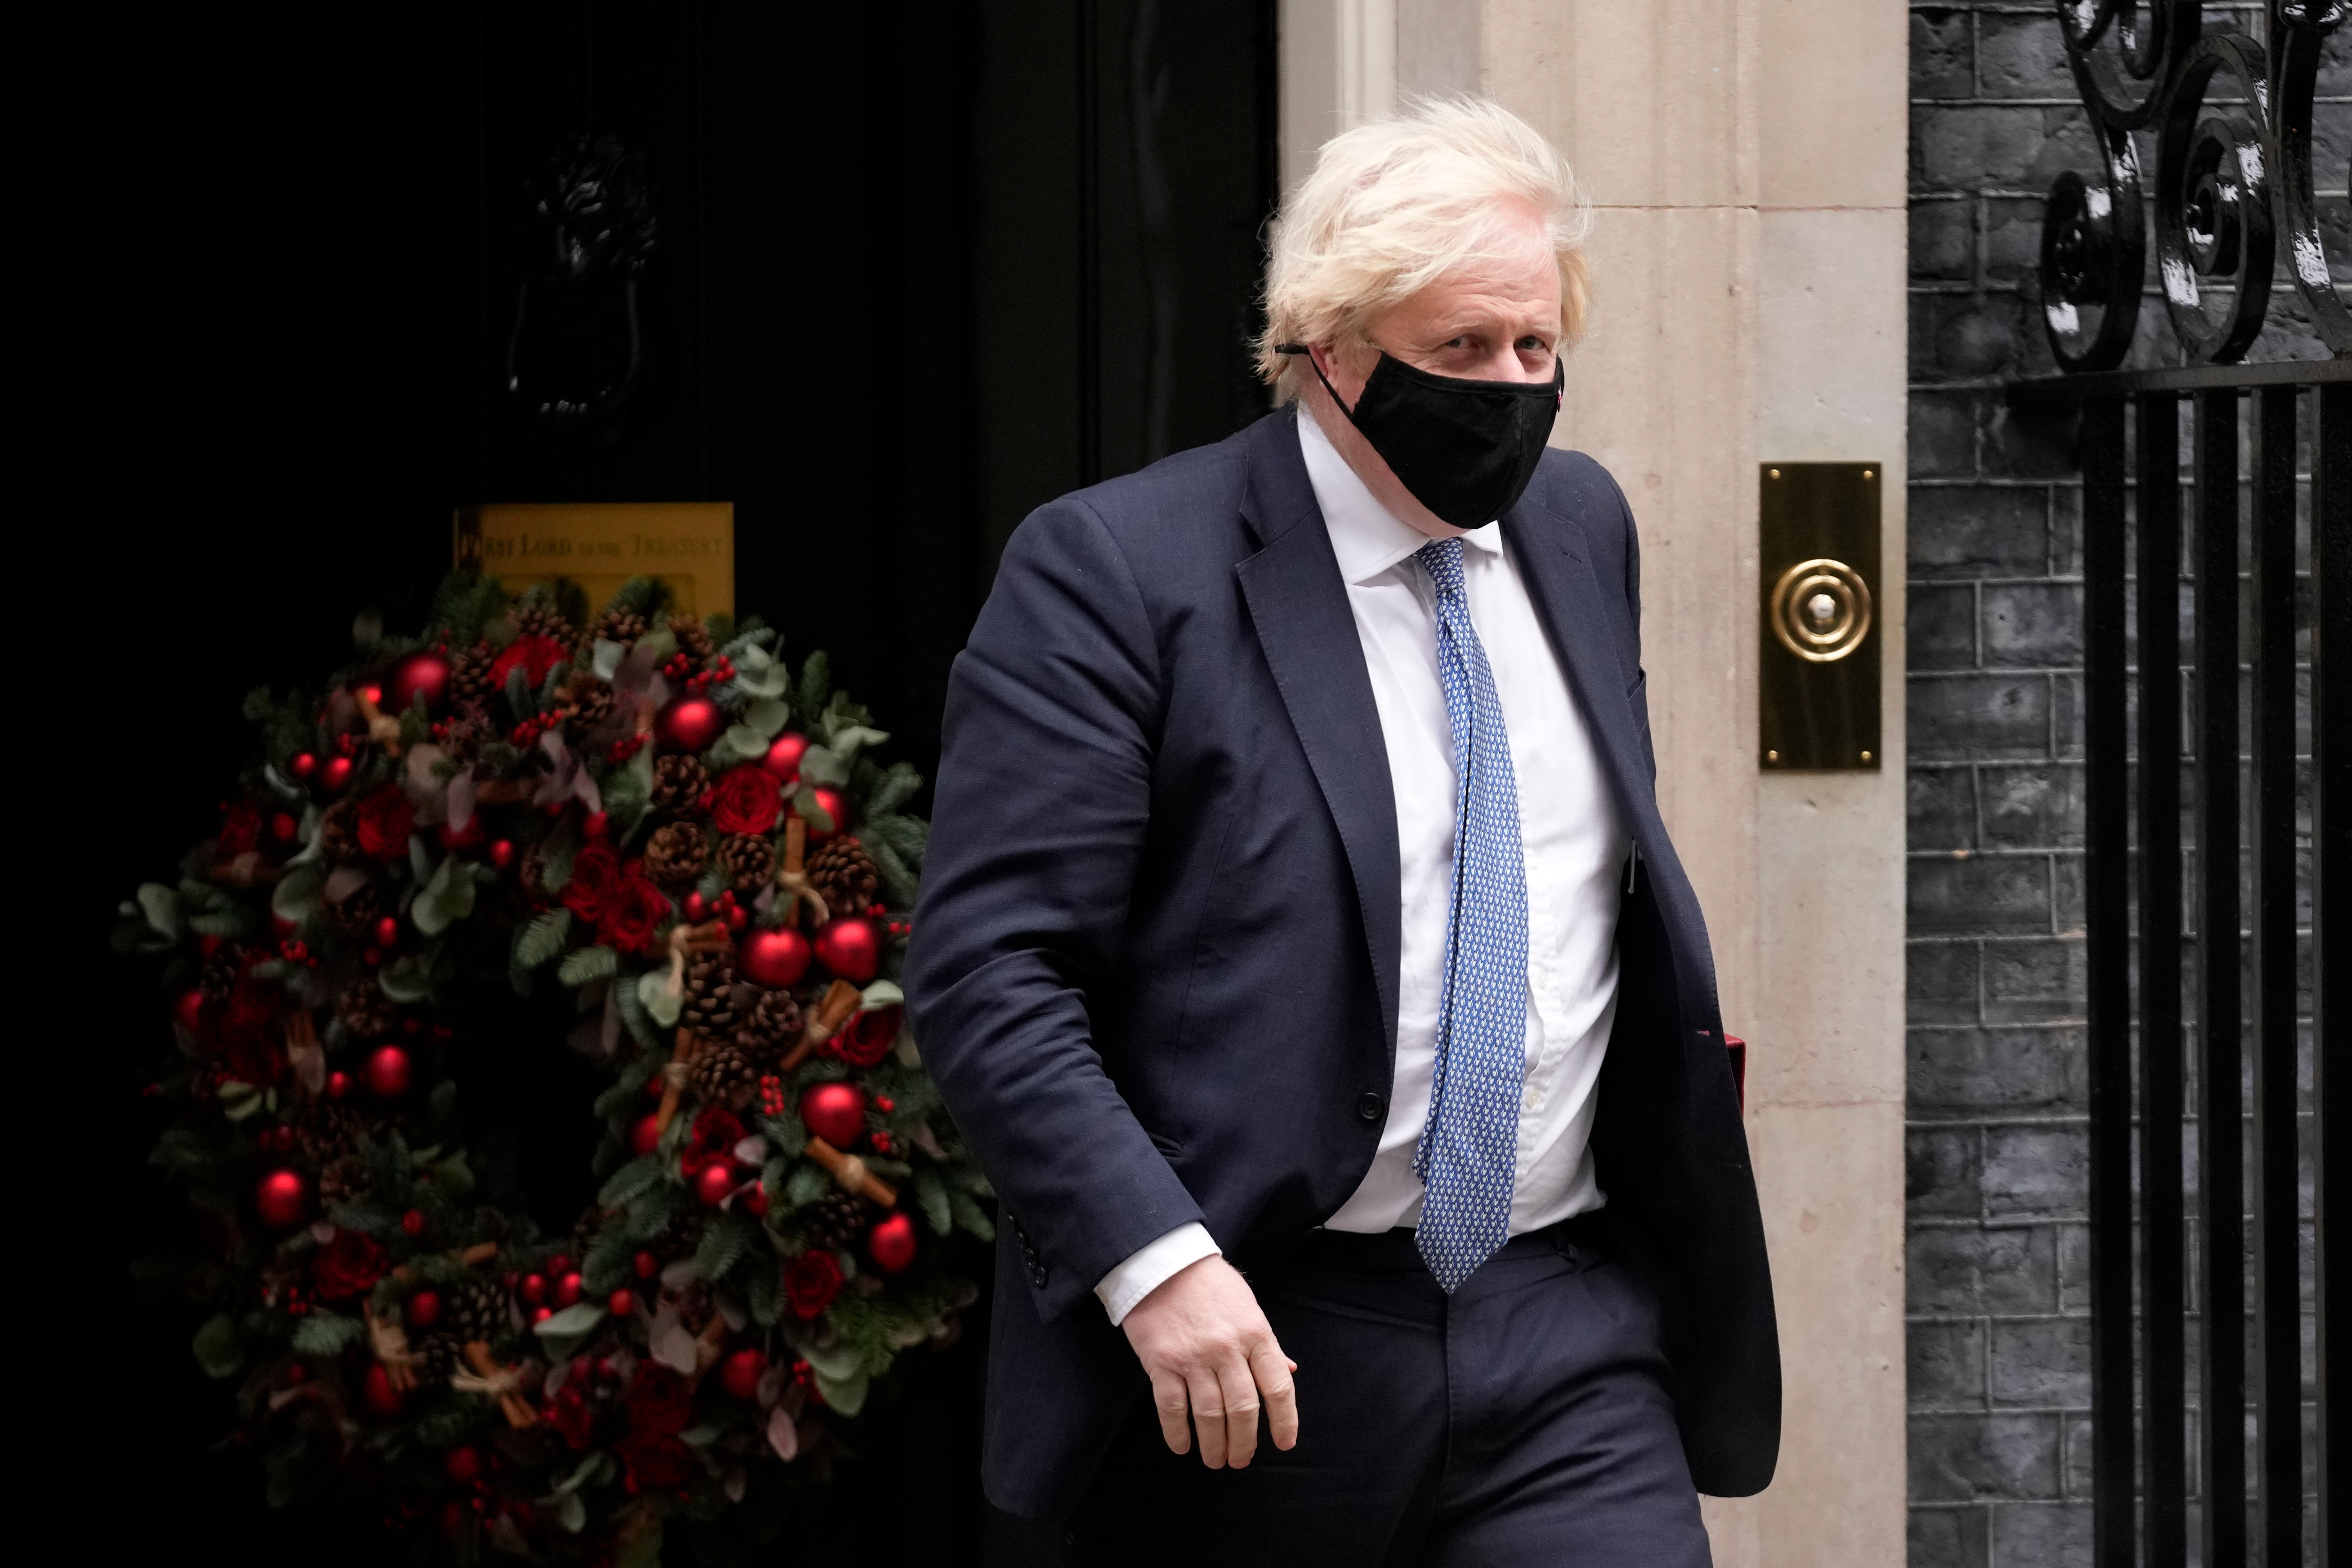 British Prime Minister Boris Johnson leaves 10 Downing Street to attend the weekly Prime Minister’s Questions at the Houses of Parliament, in London, Wednesday, 8 December, 2021.